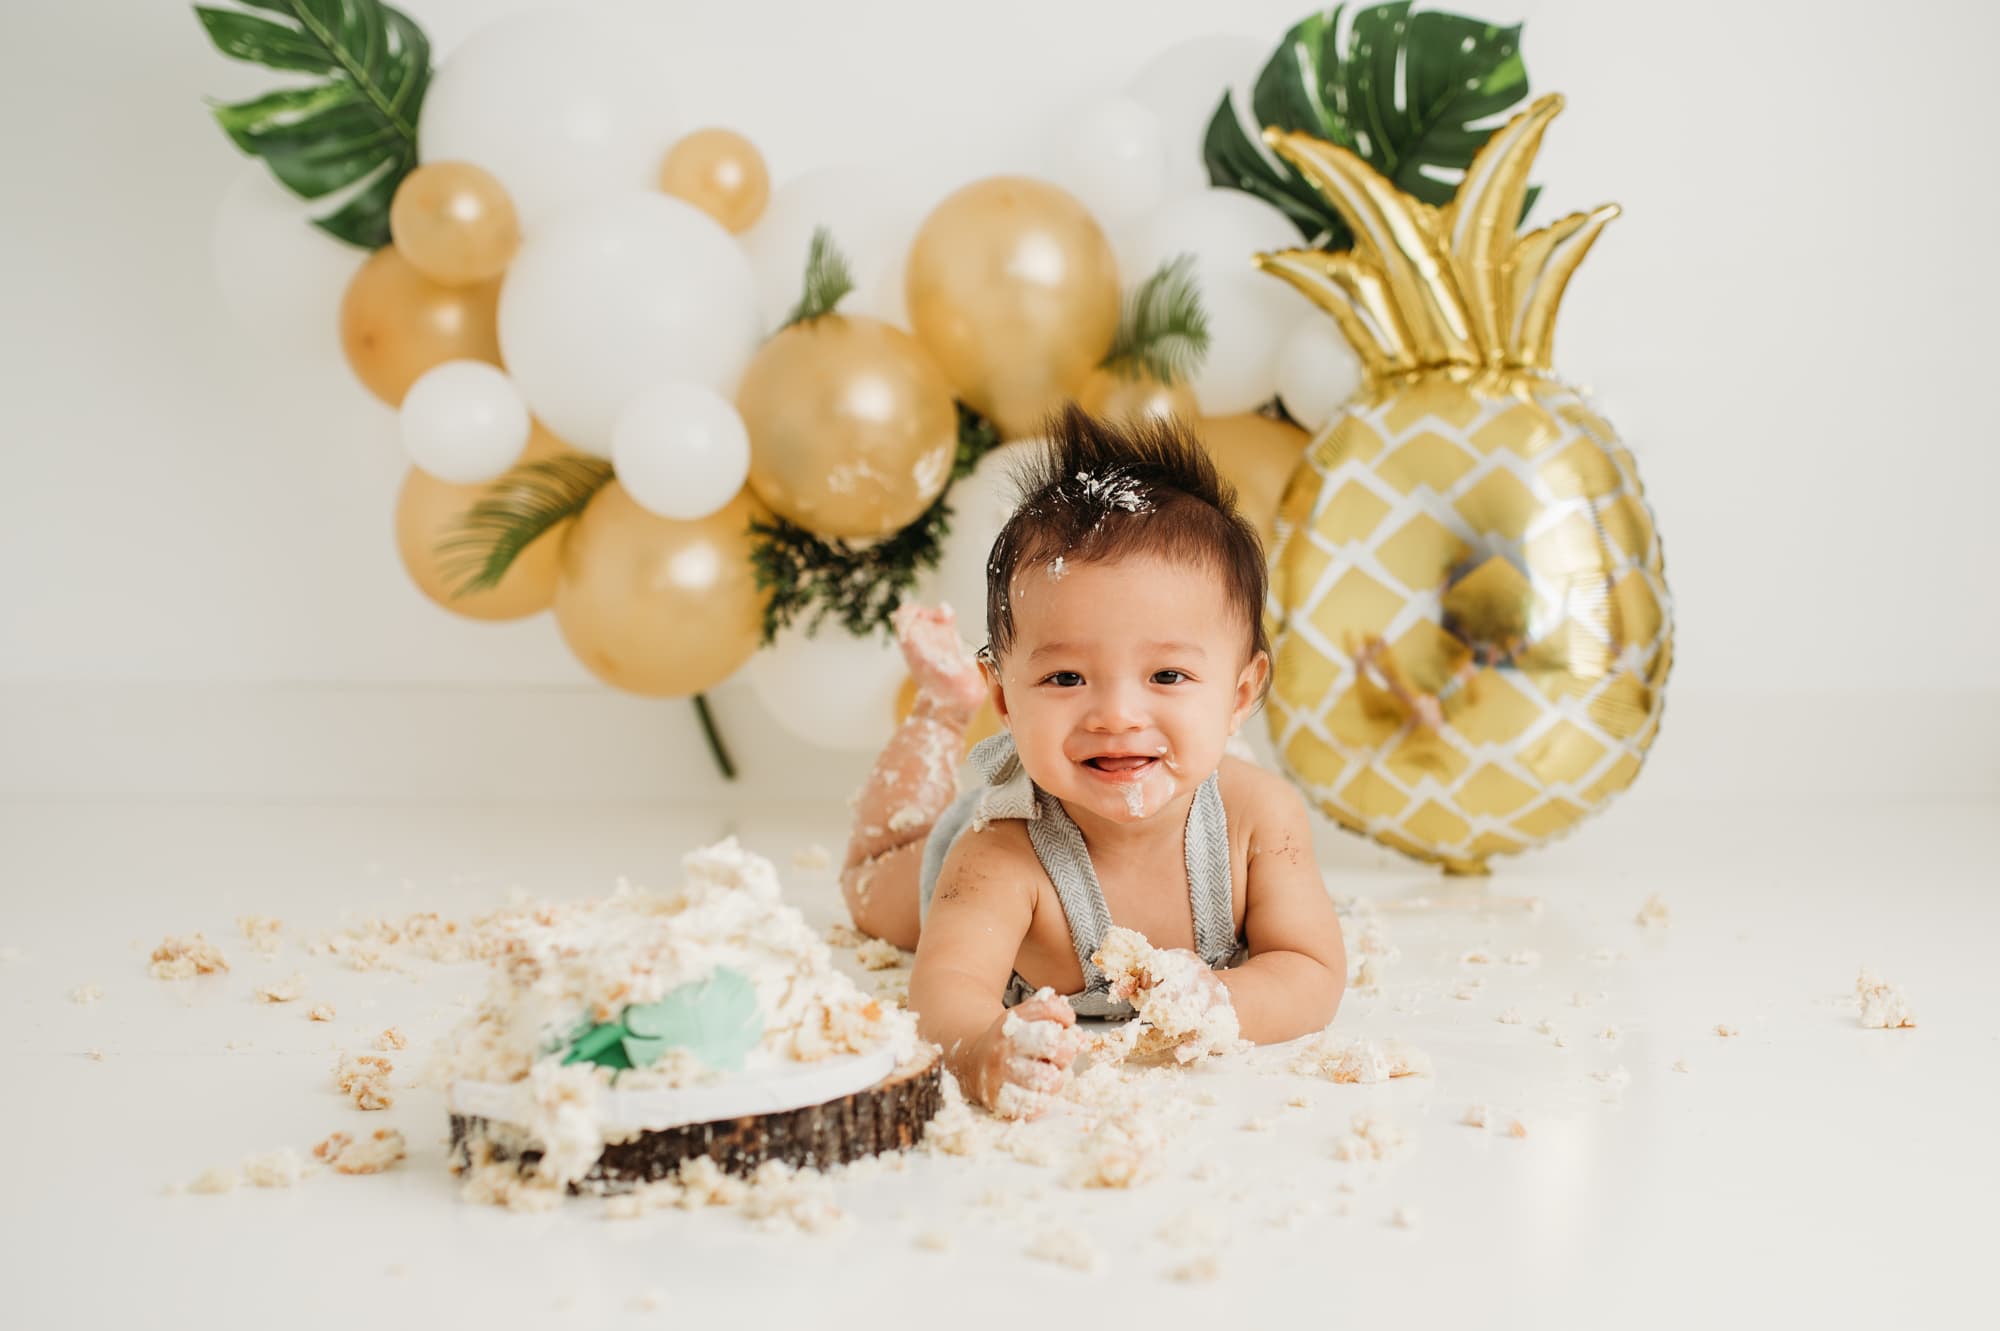 Happy and laughing boy lies next to a cake in a Vancouver cake smash portrait session.